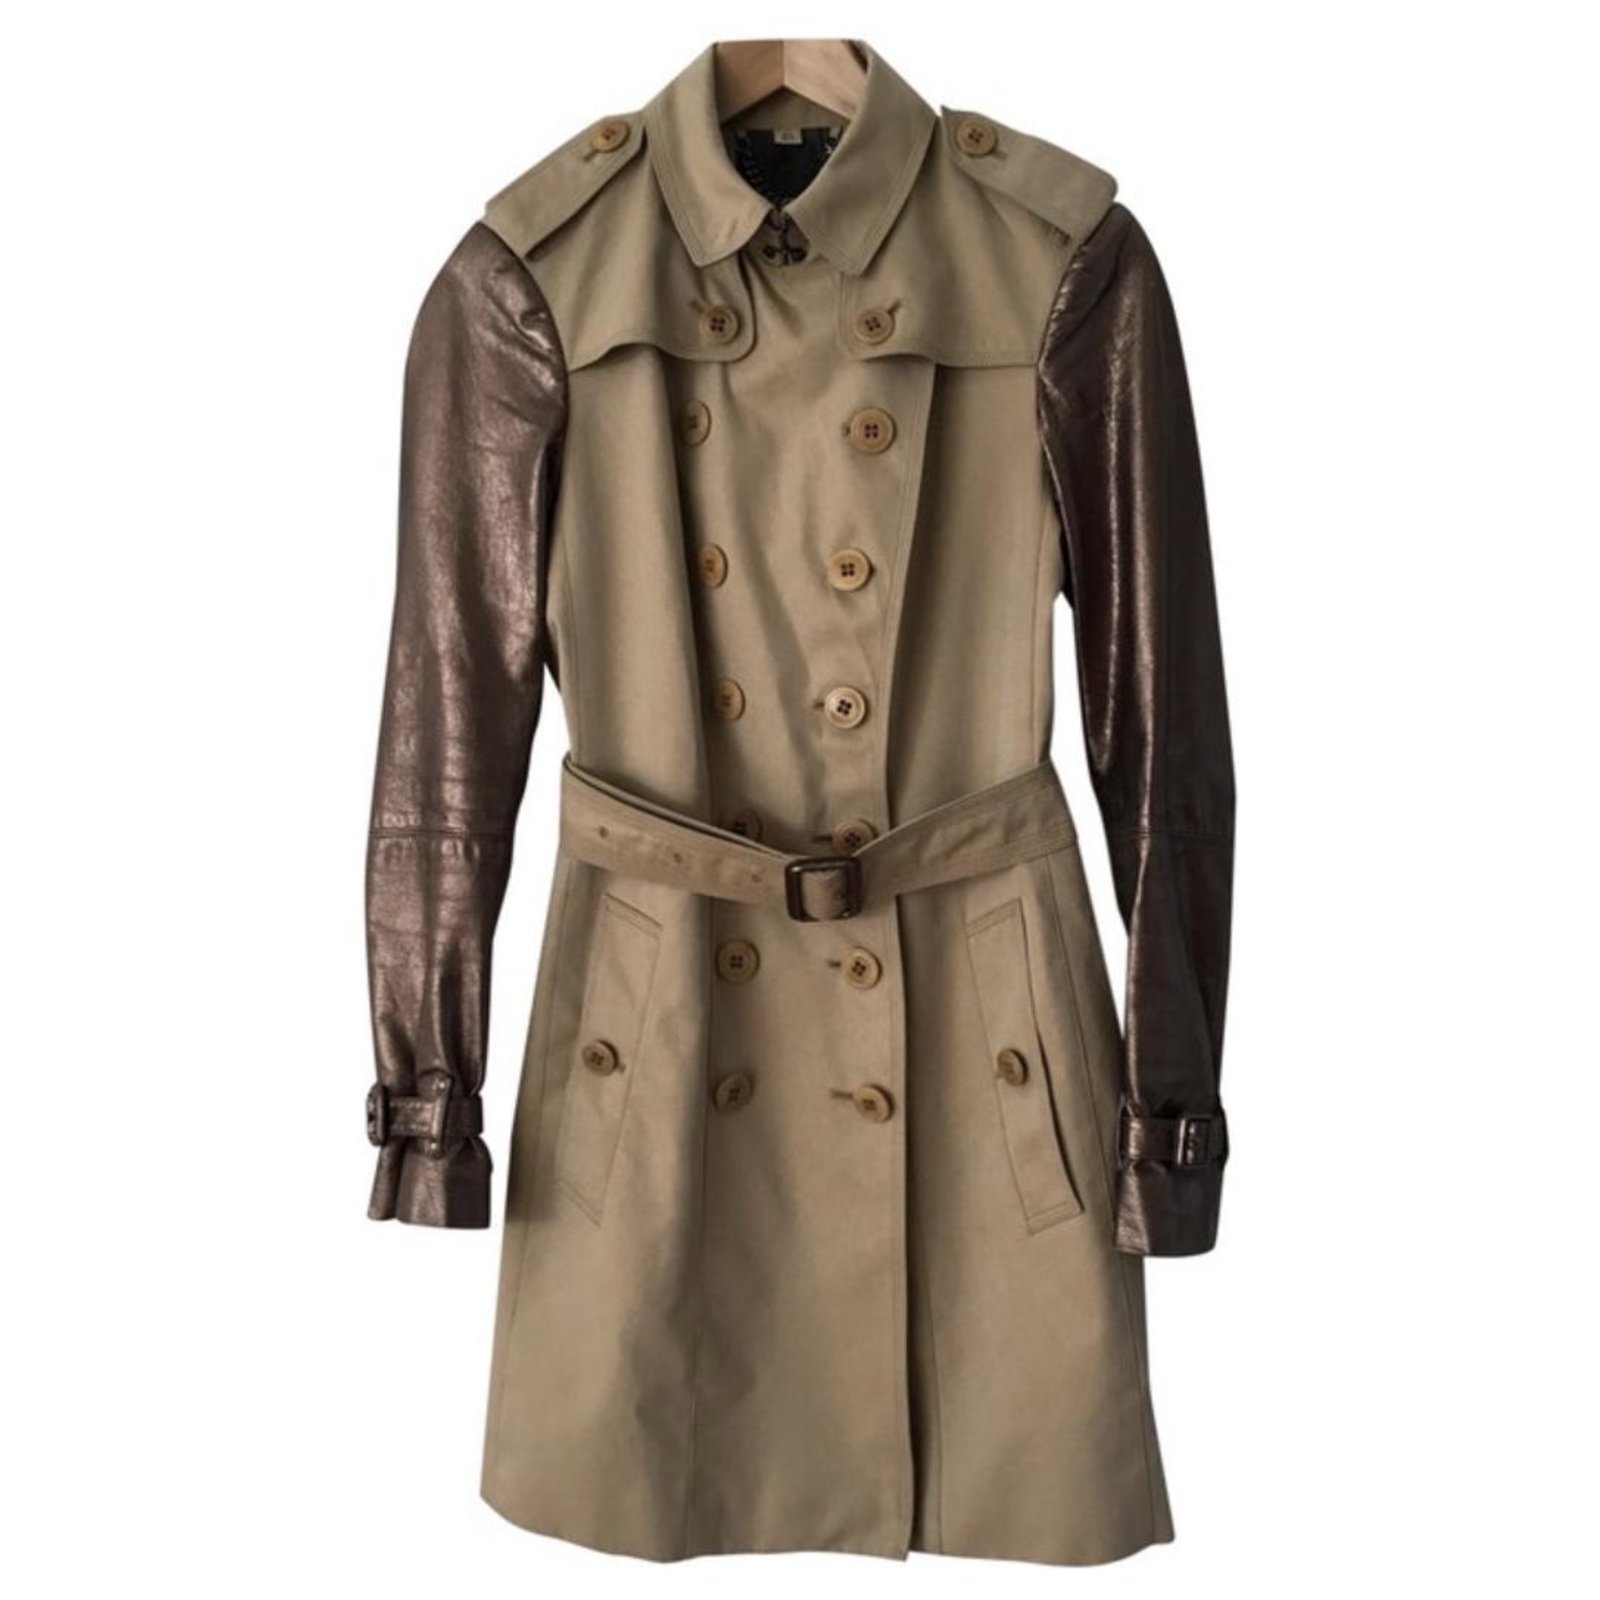 burberry trench with leather